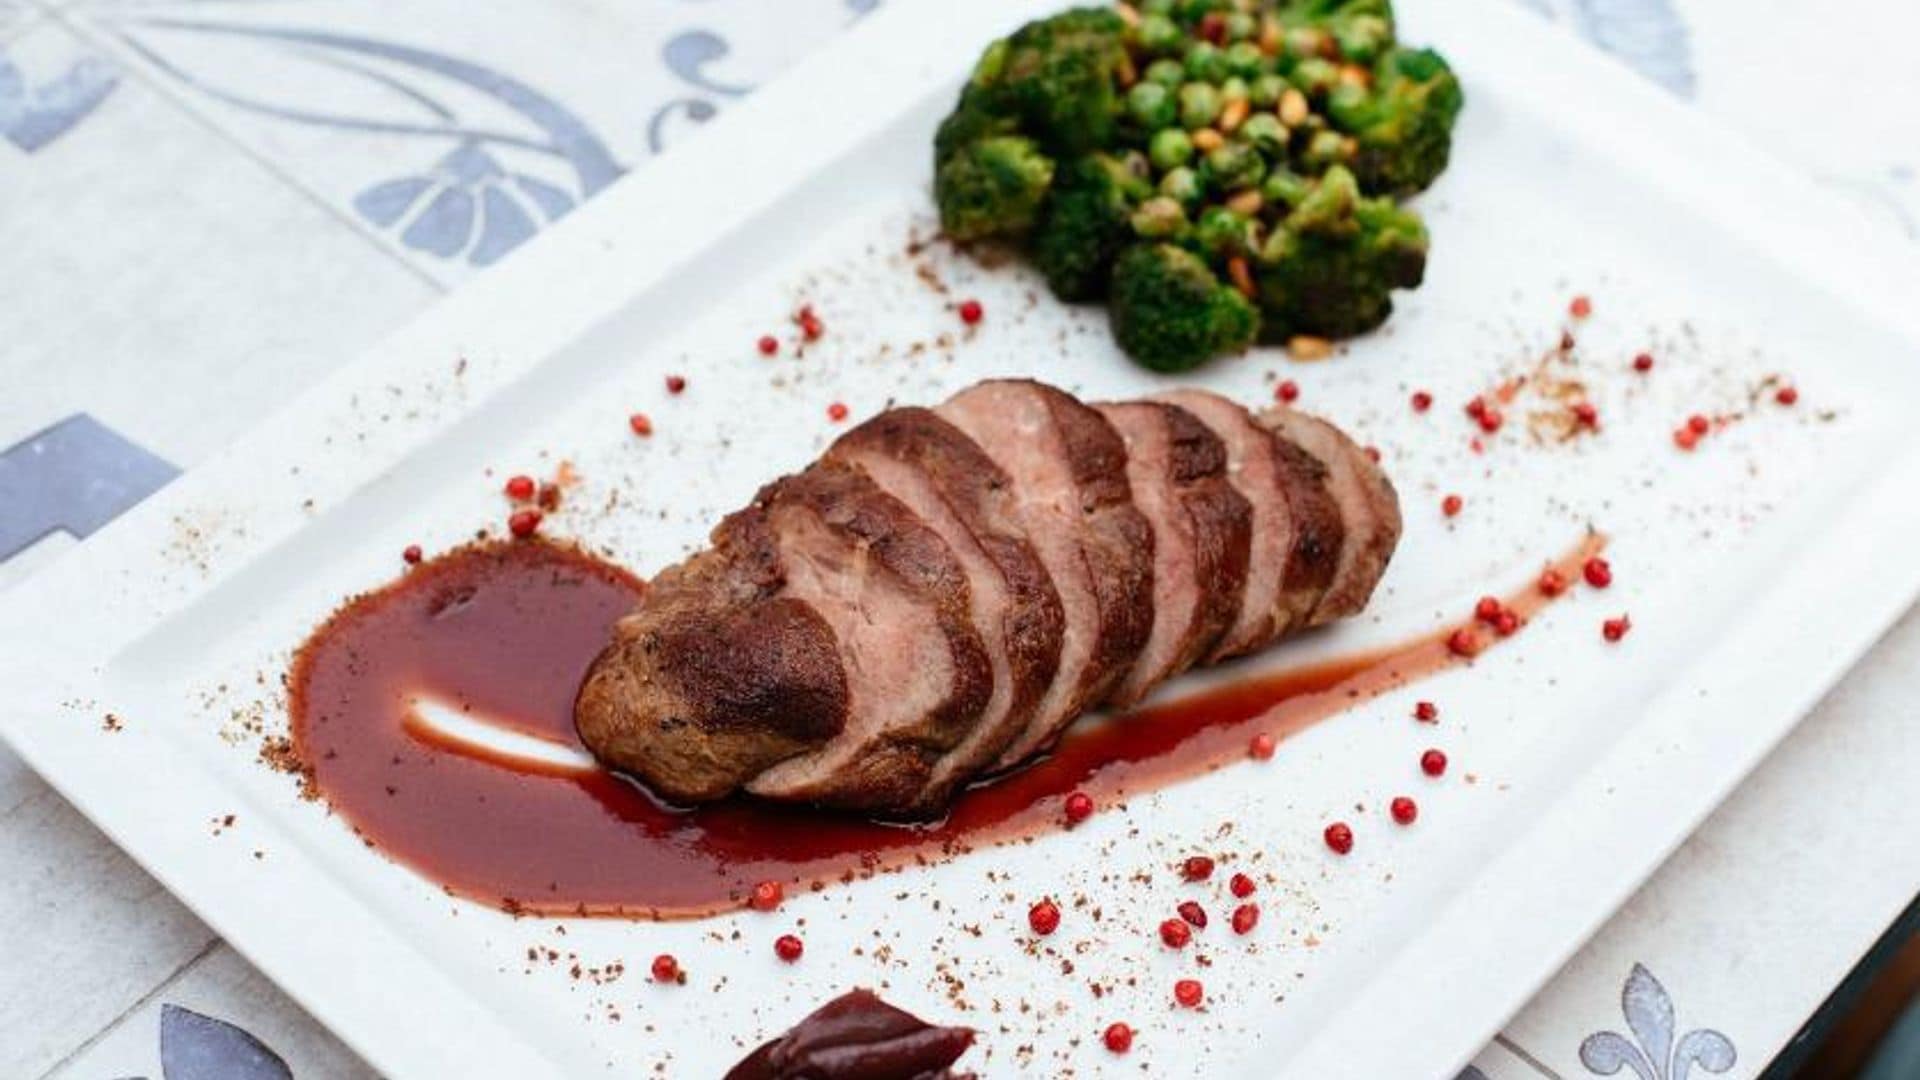 Impress your familia during Noche Buena with this savory pork loin